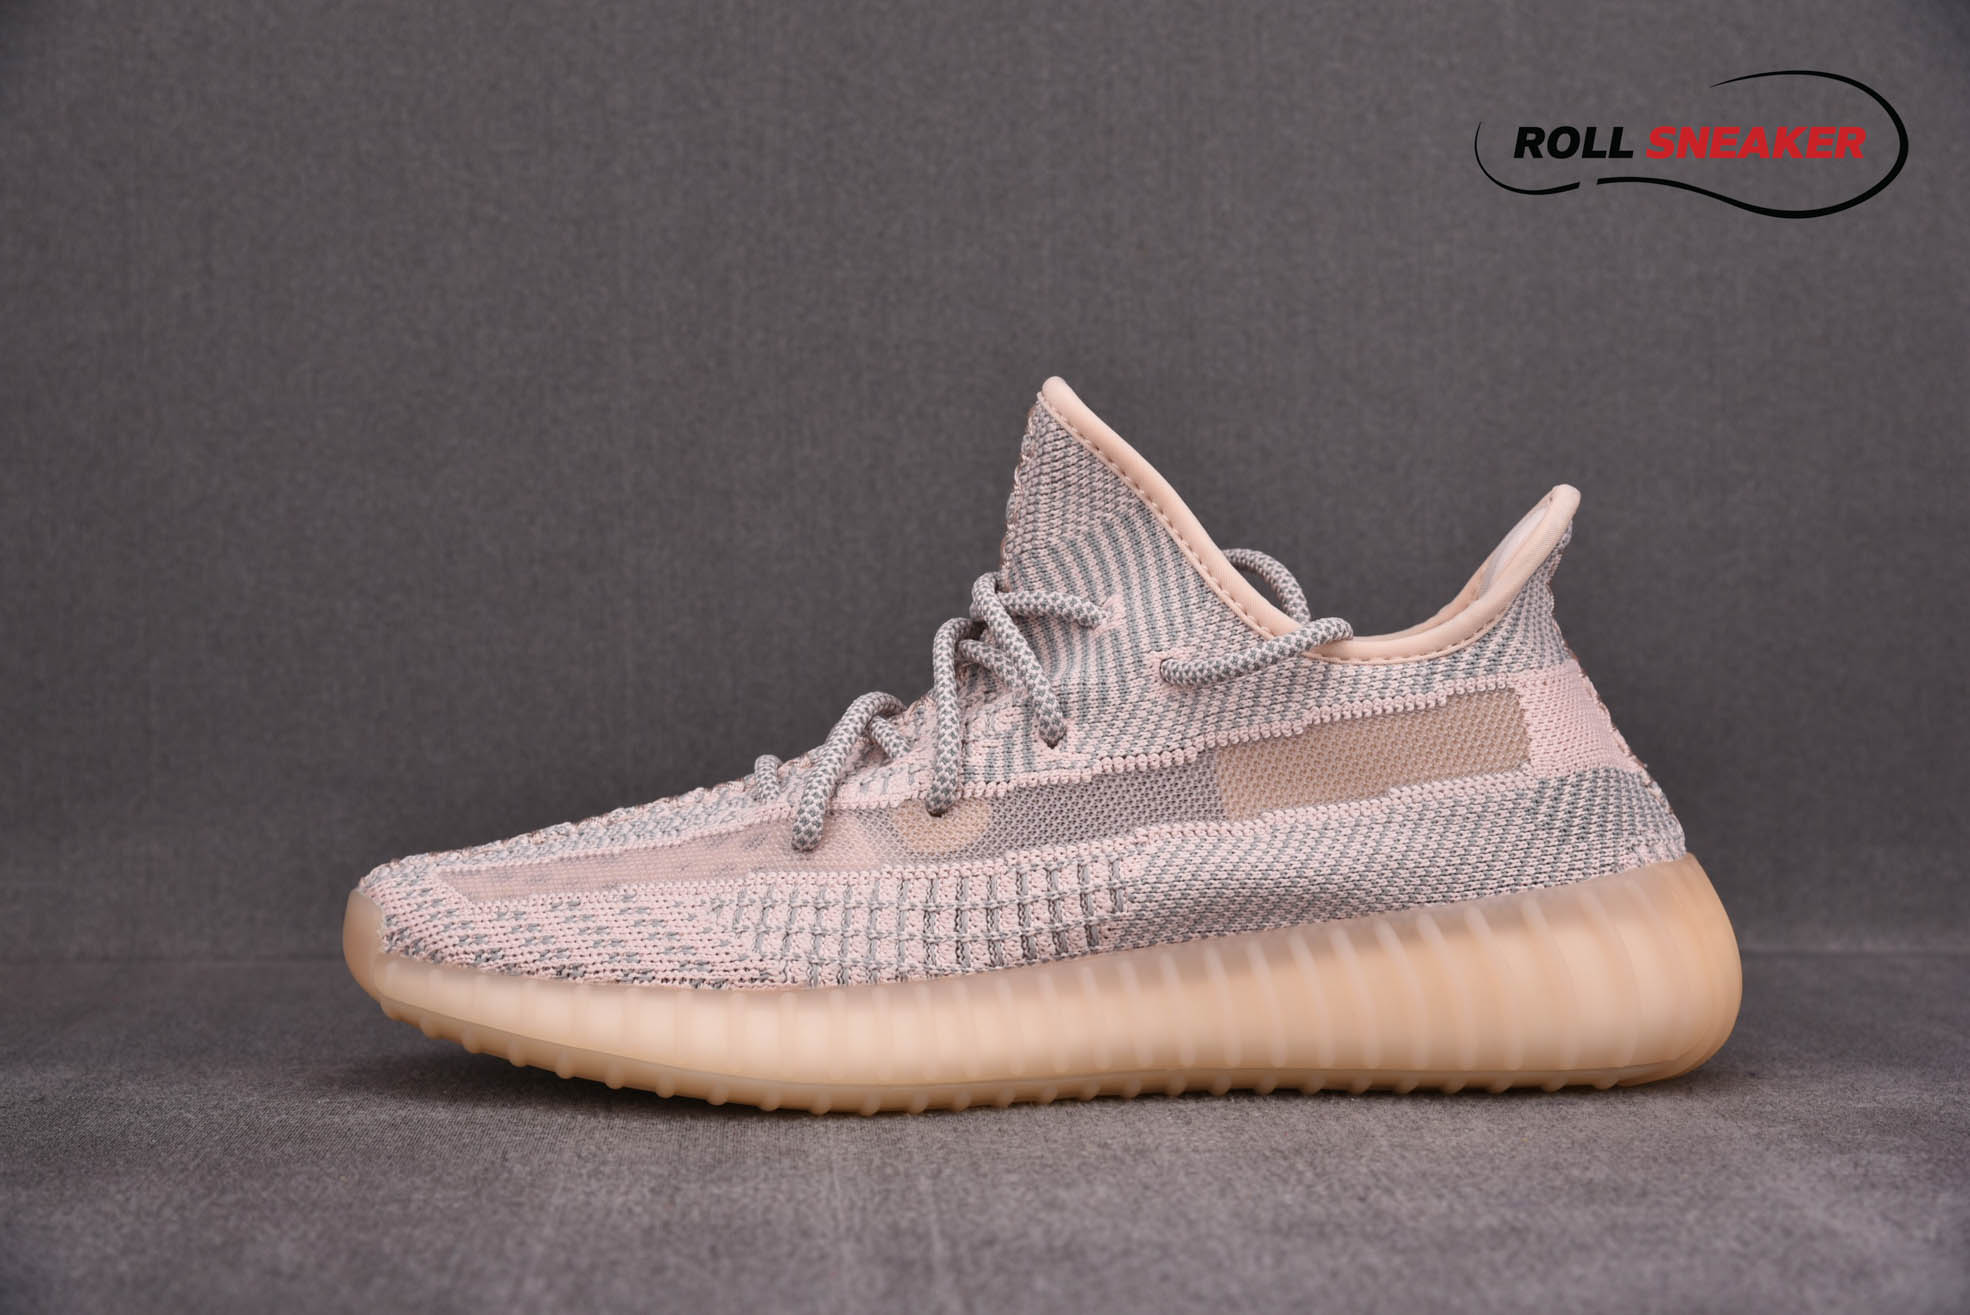 Adidas Yeezy Boost 350 V2 ‘Synth Non-Reflective’
